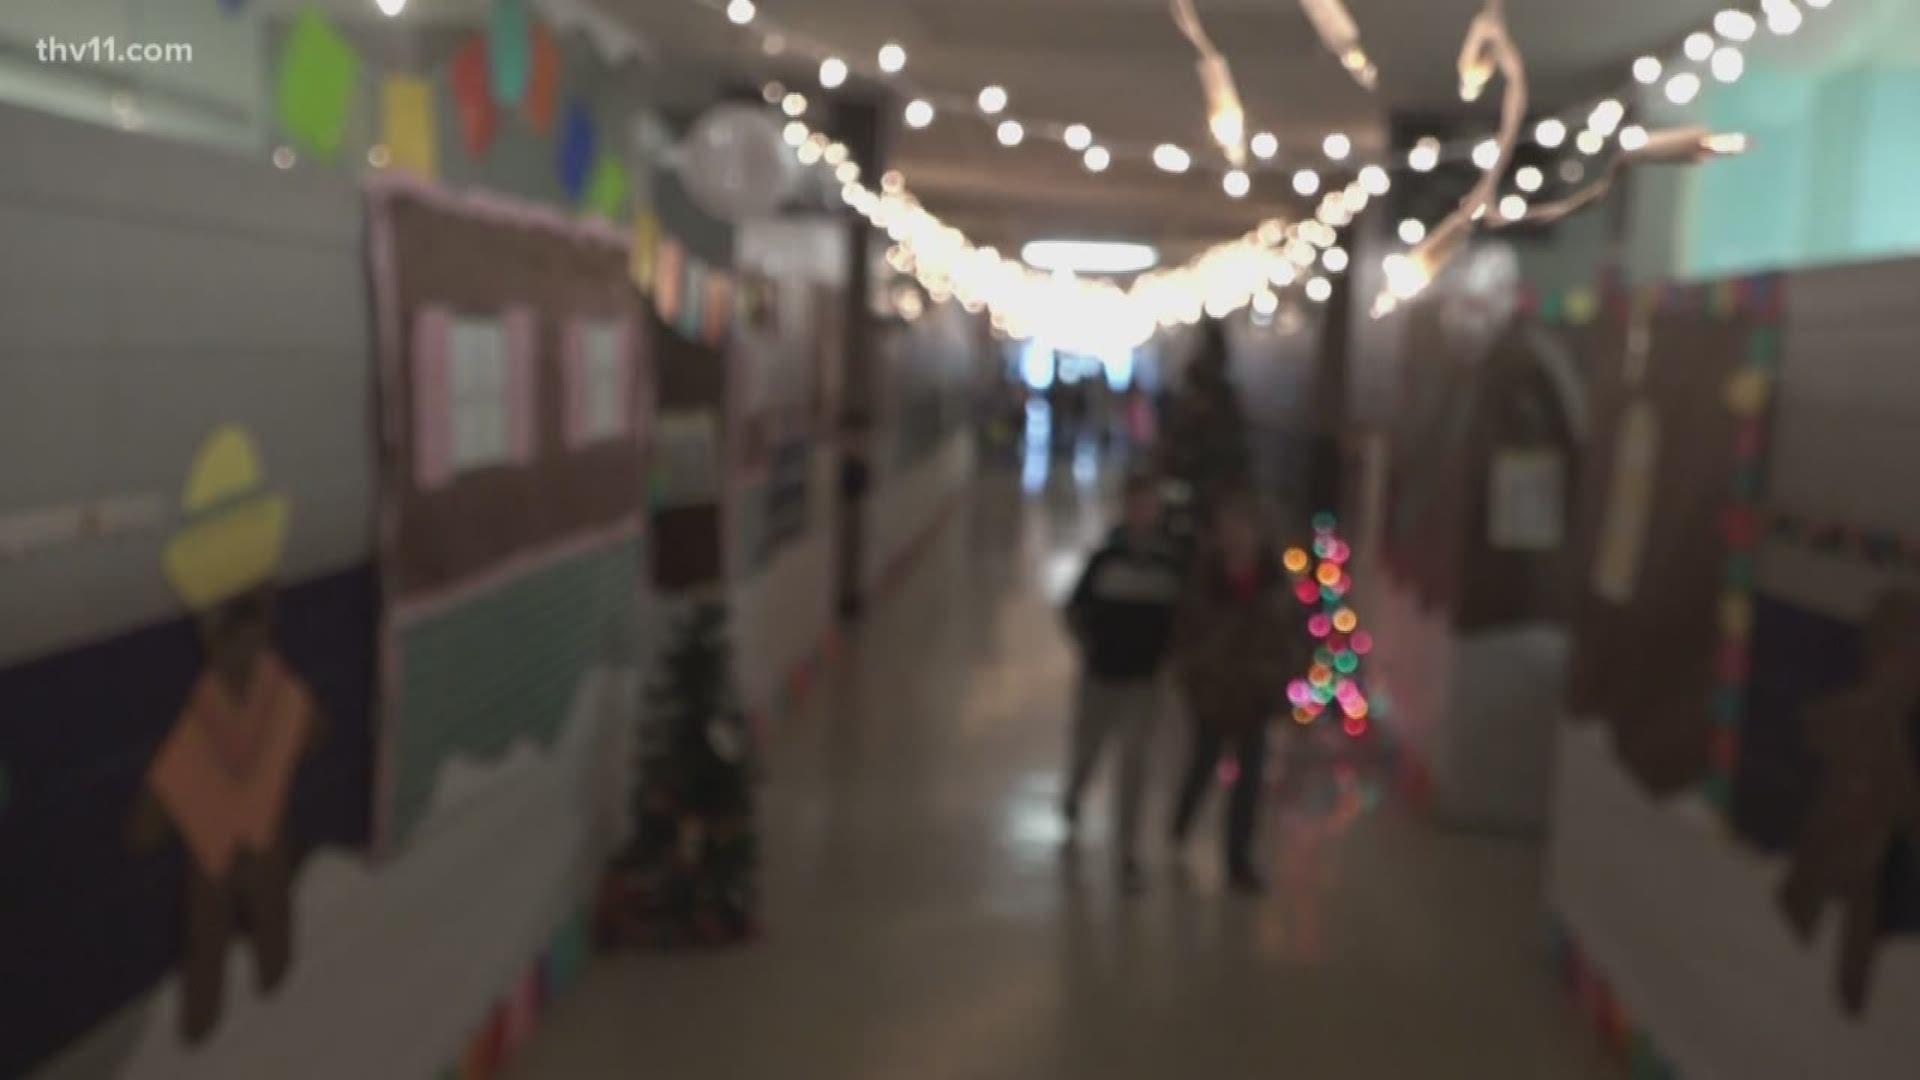 Every year the teachers and faculty at England Elementary School try to do something special for the holidays, but this year turned into something never done before.